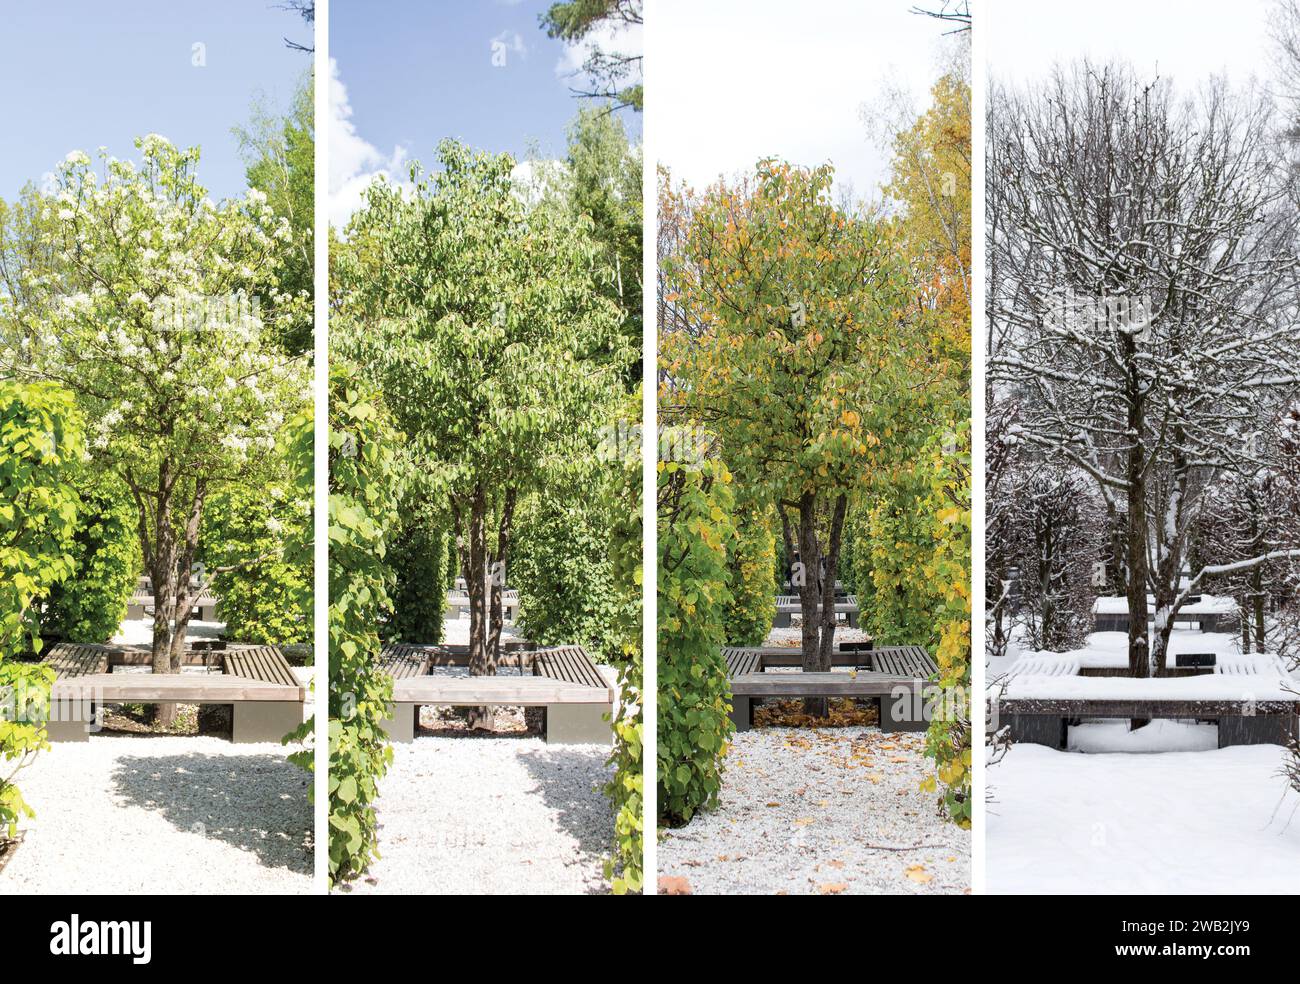 Collage mixing photos of the pear tree, by the lake in four seasons of the year. Stock Photo